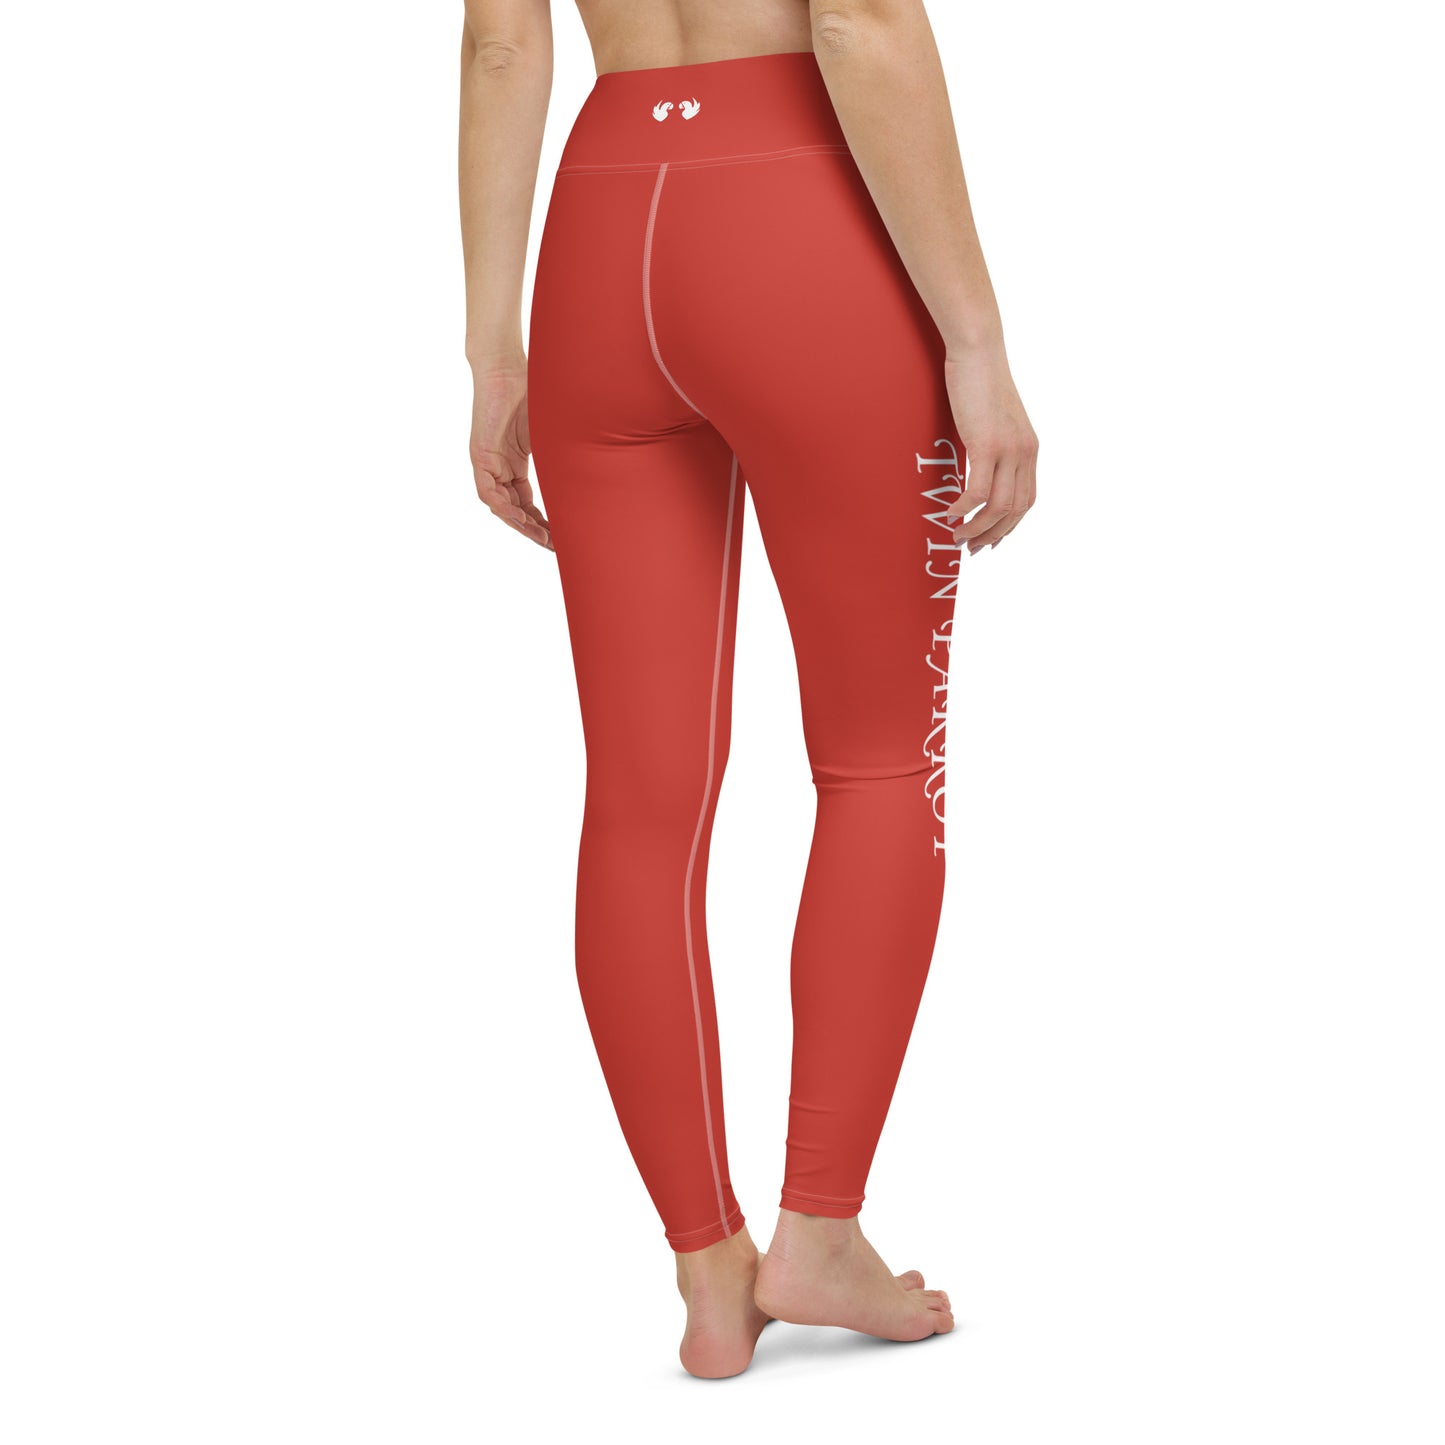 Luxe Red Yoga Leggings: Made-to-Move Comfort, Made-to-Minimize Waste